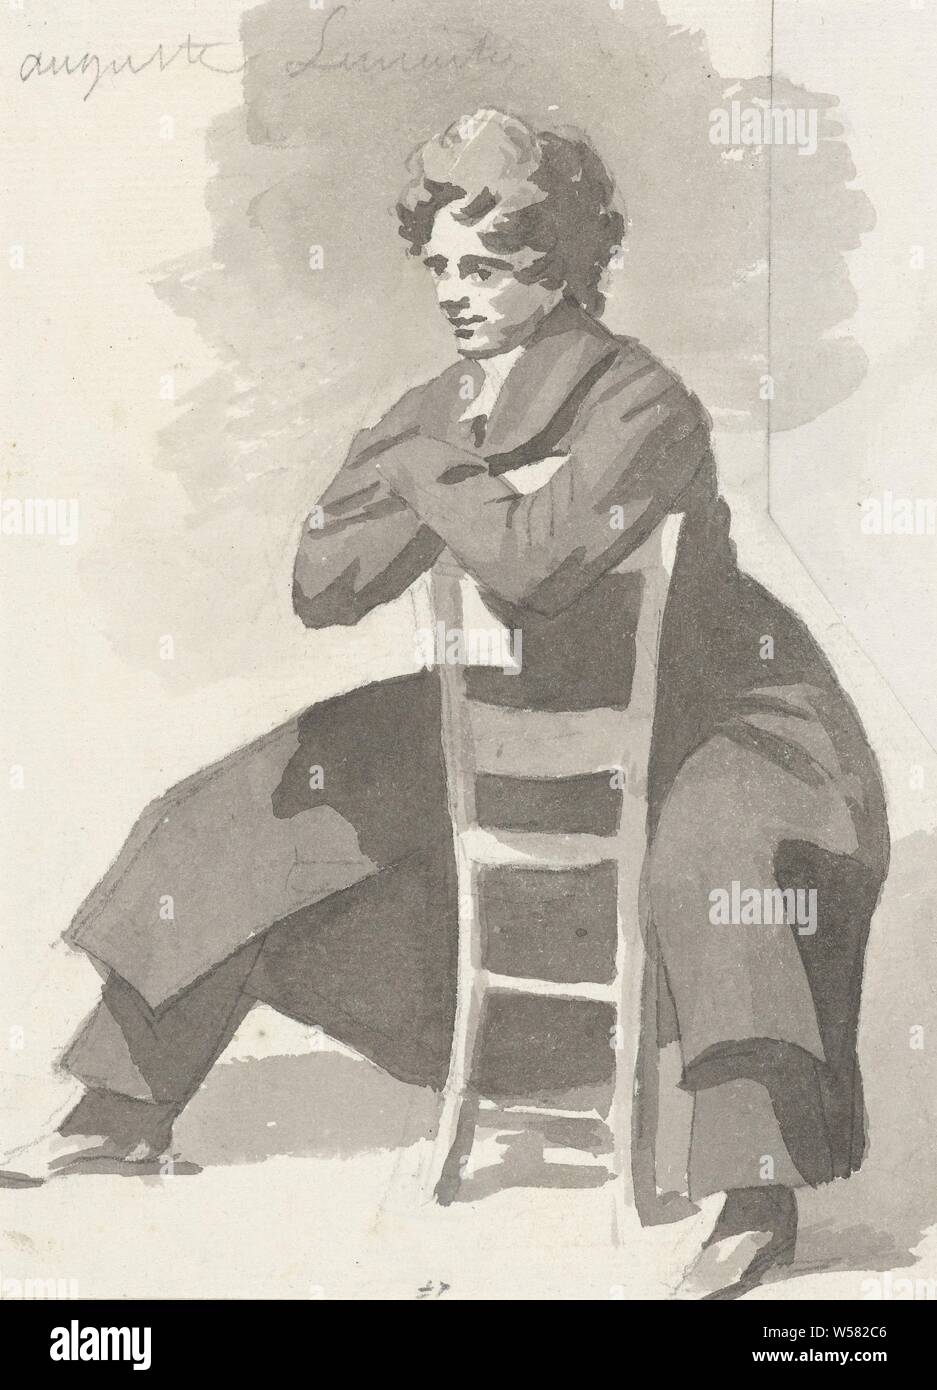 Portrait of Augustin Lemaitre, sitting on a chair, Camille Chenou Levesque, 1800 - 1900, paper, pencil, brush, h 167 mm × w 120 mm Stock Photo